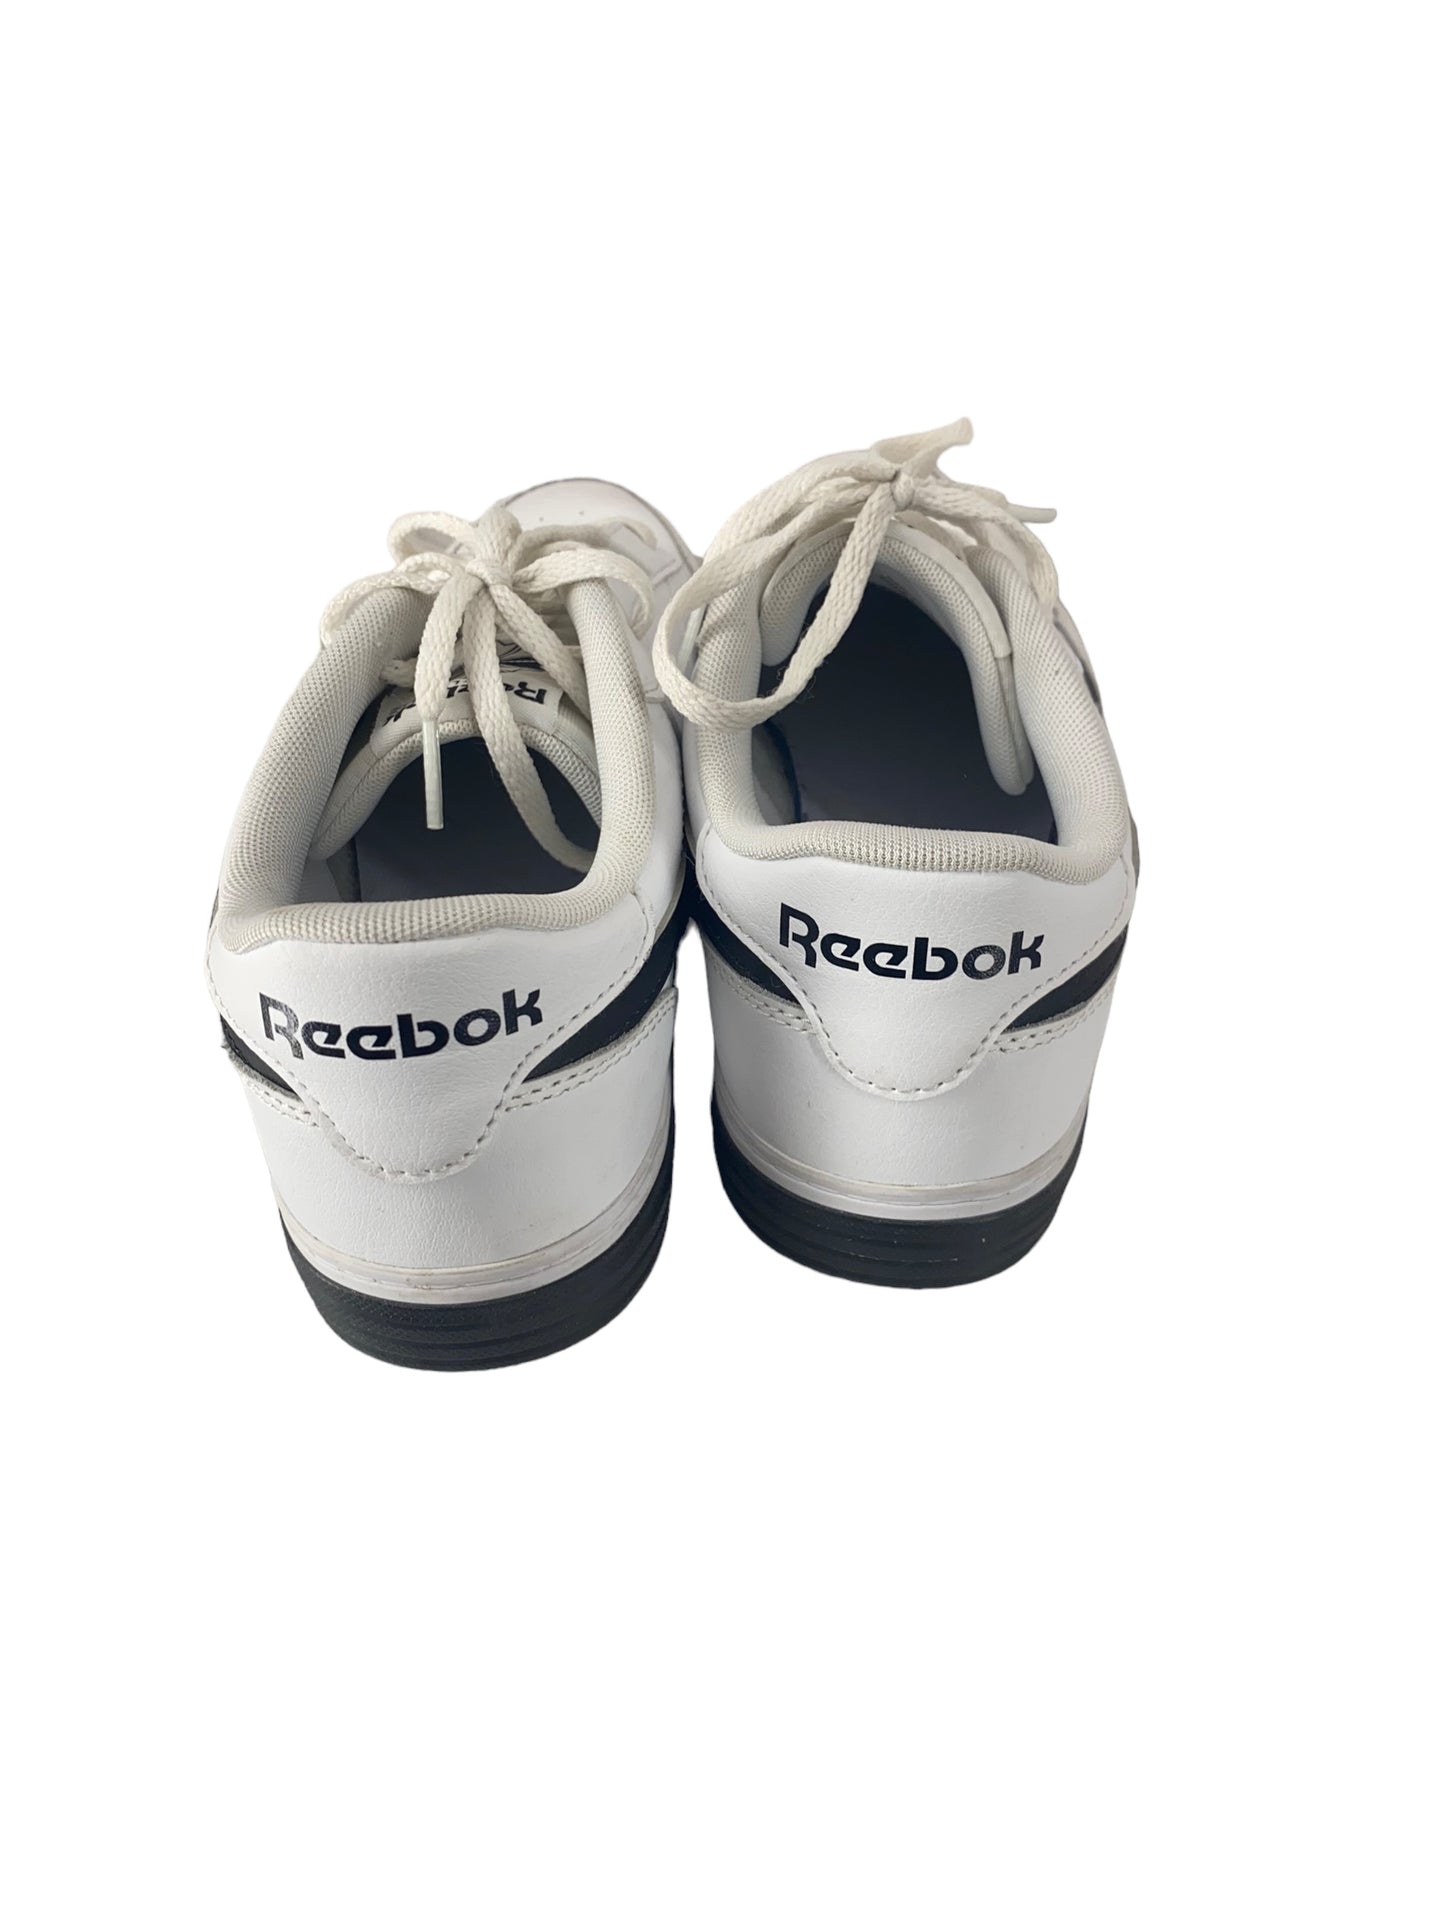 Shoes Athletic By Reebok  Size: 8.5